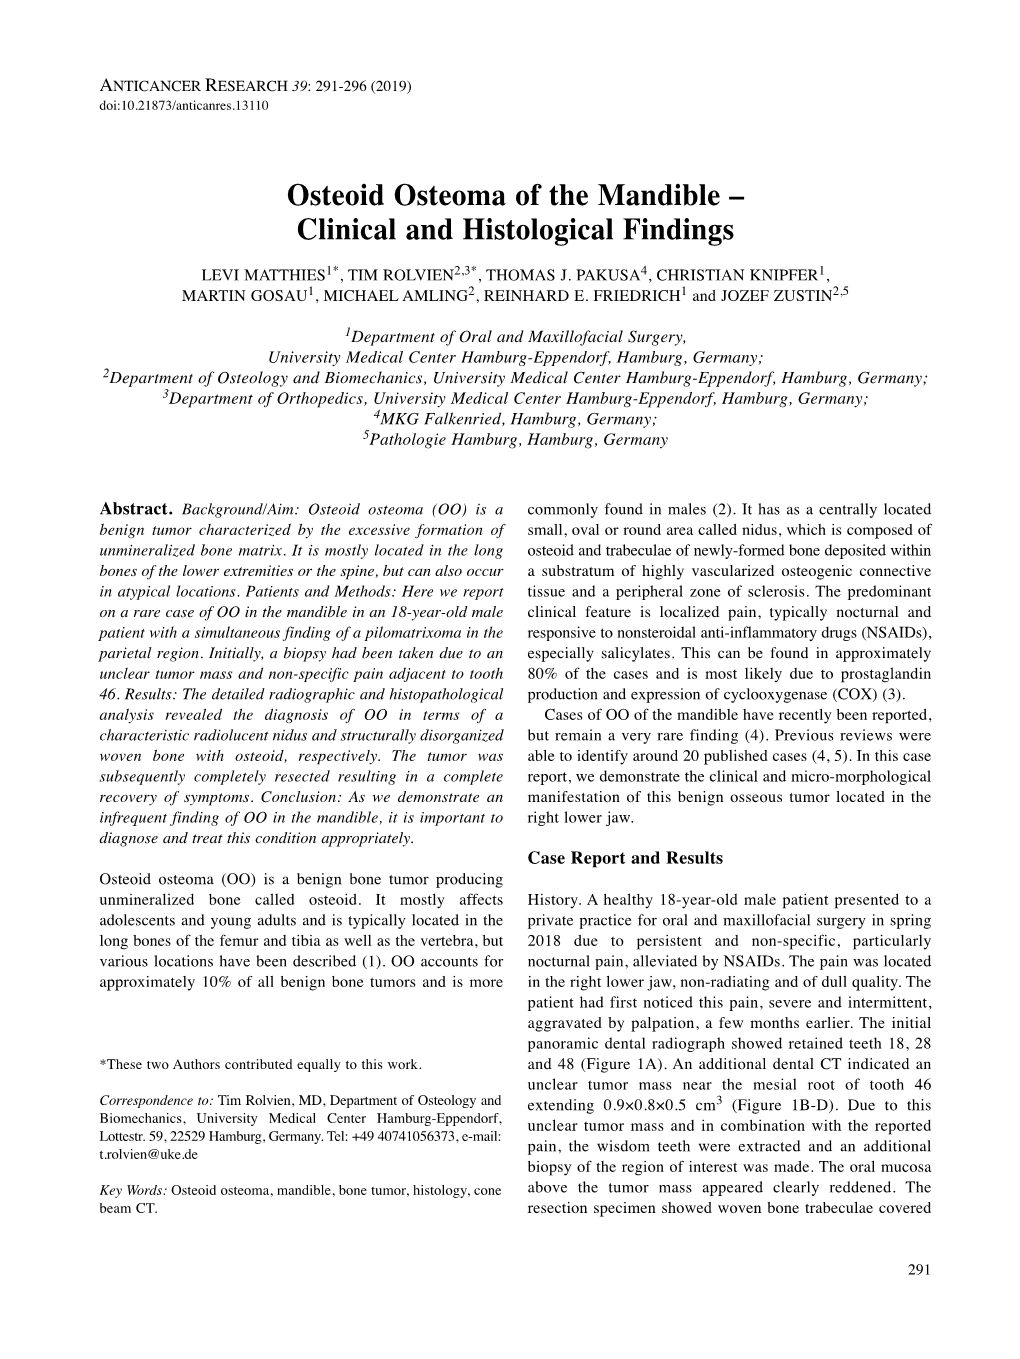 Osteoid Osteoma of the Mandible – Clinical and Histological Findings LEVI MATTHIES 1* , TIM ROLVIEN 2,3* , THOMAS J